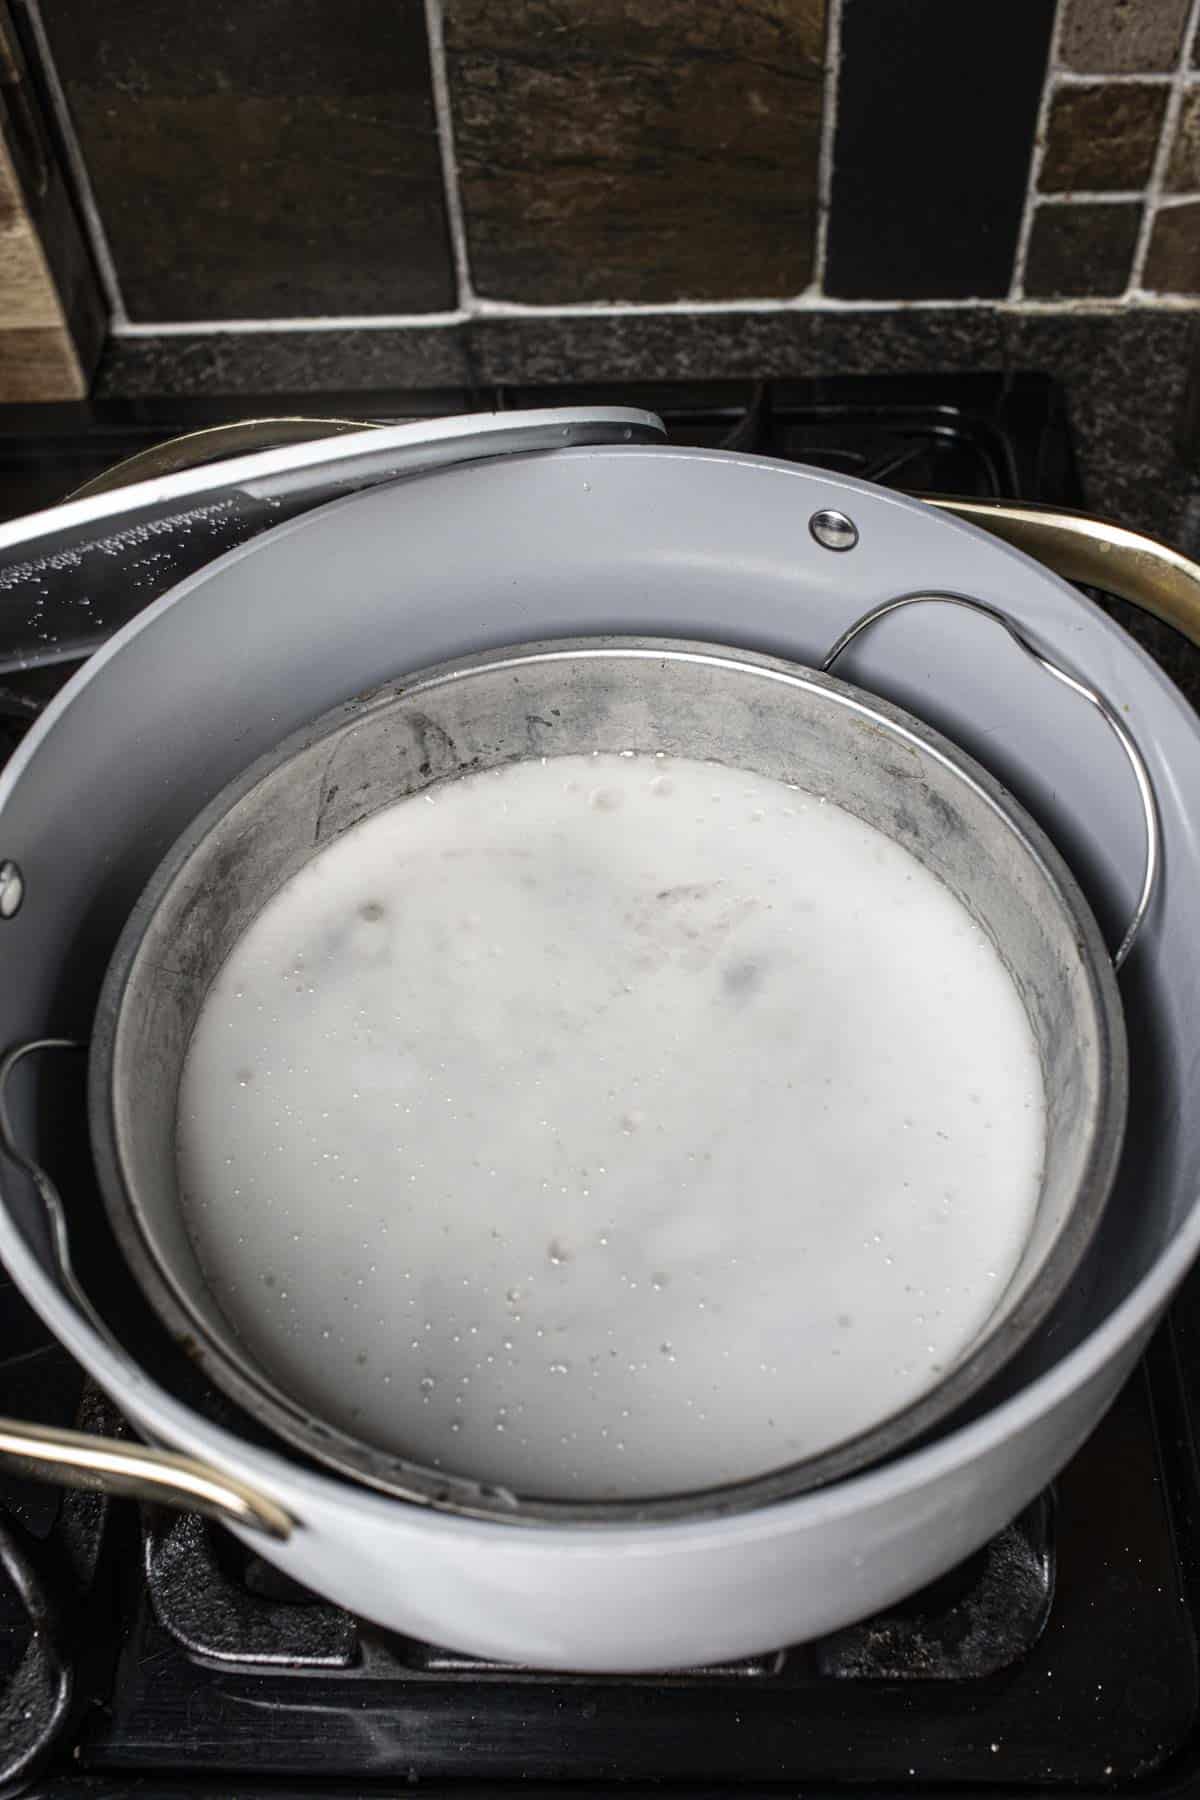 white rice noodles in around pan inside a steamer on the stove.